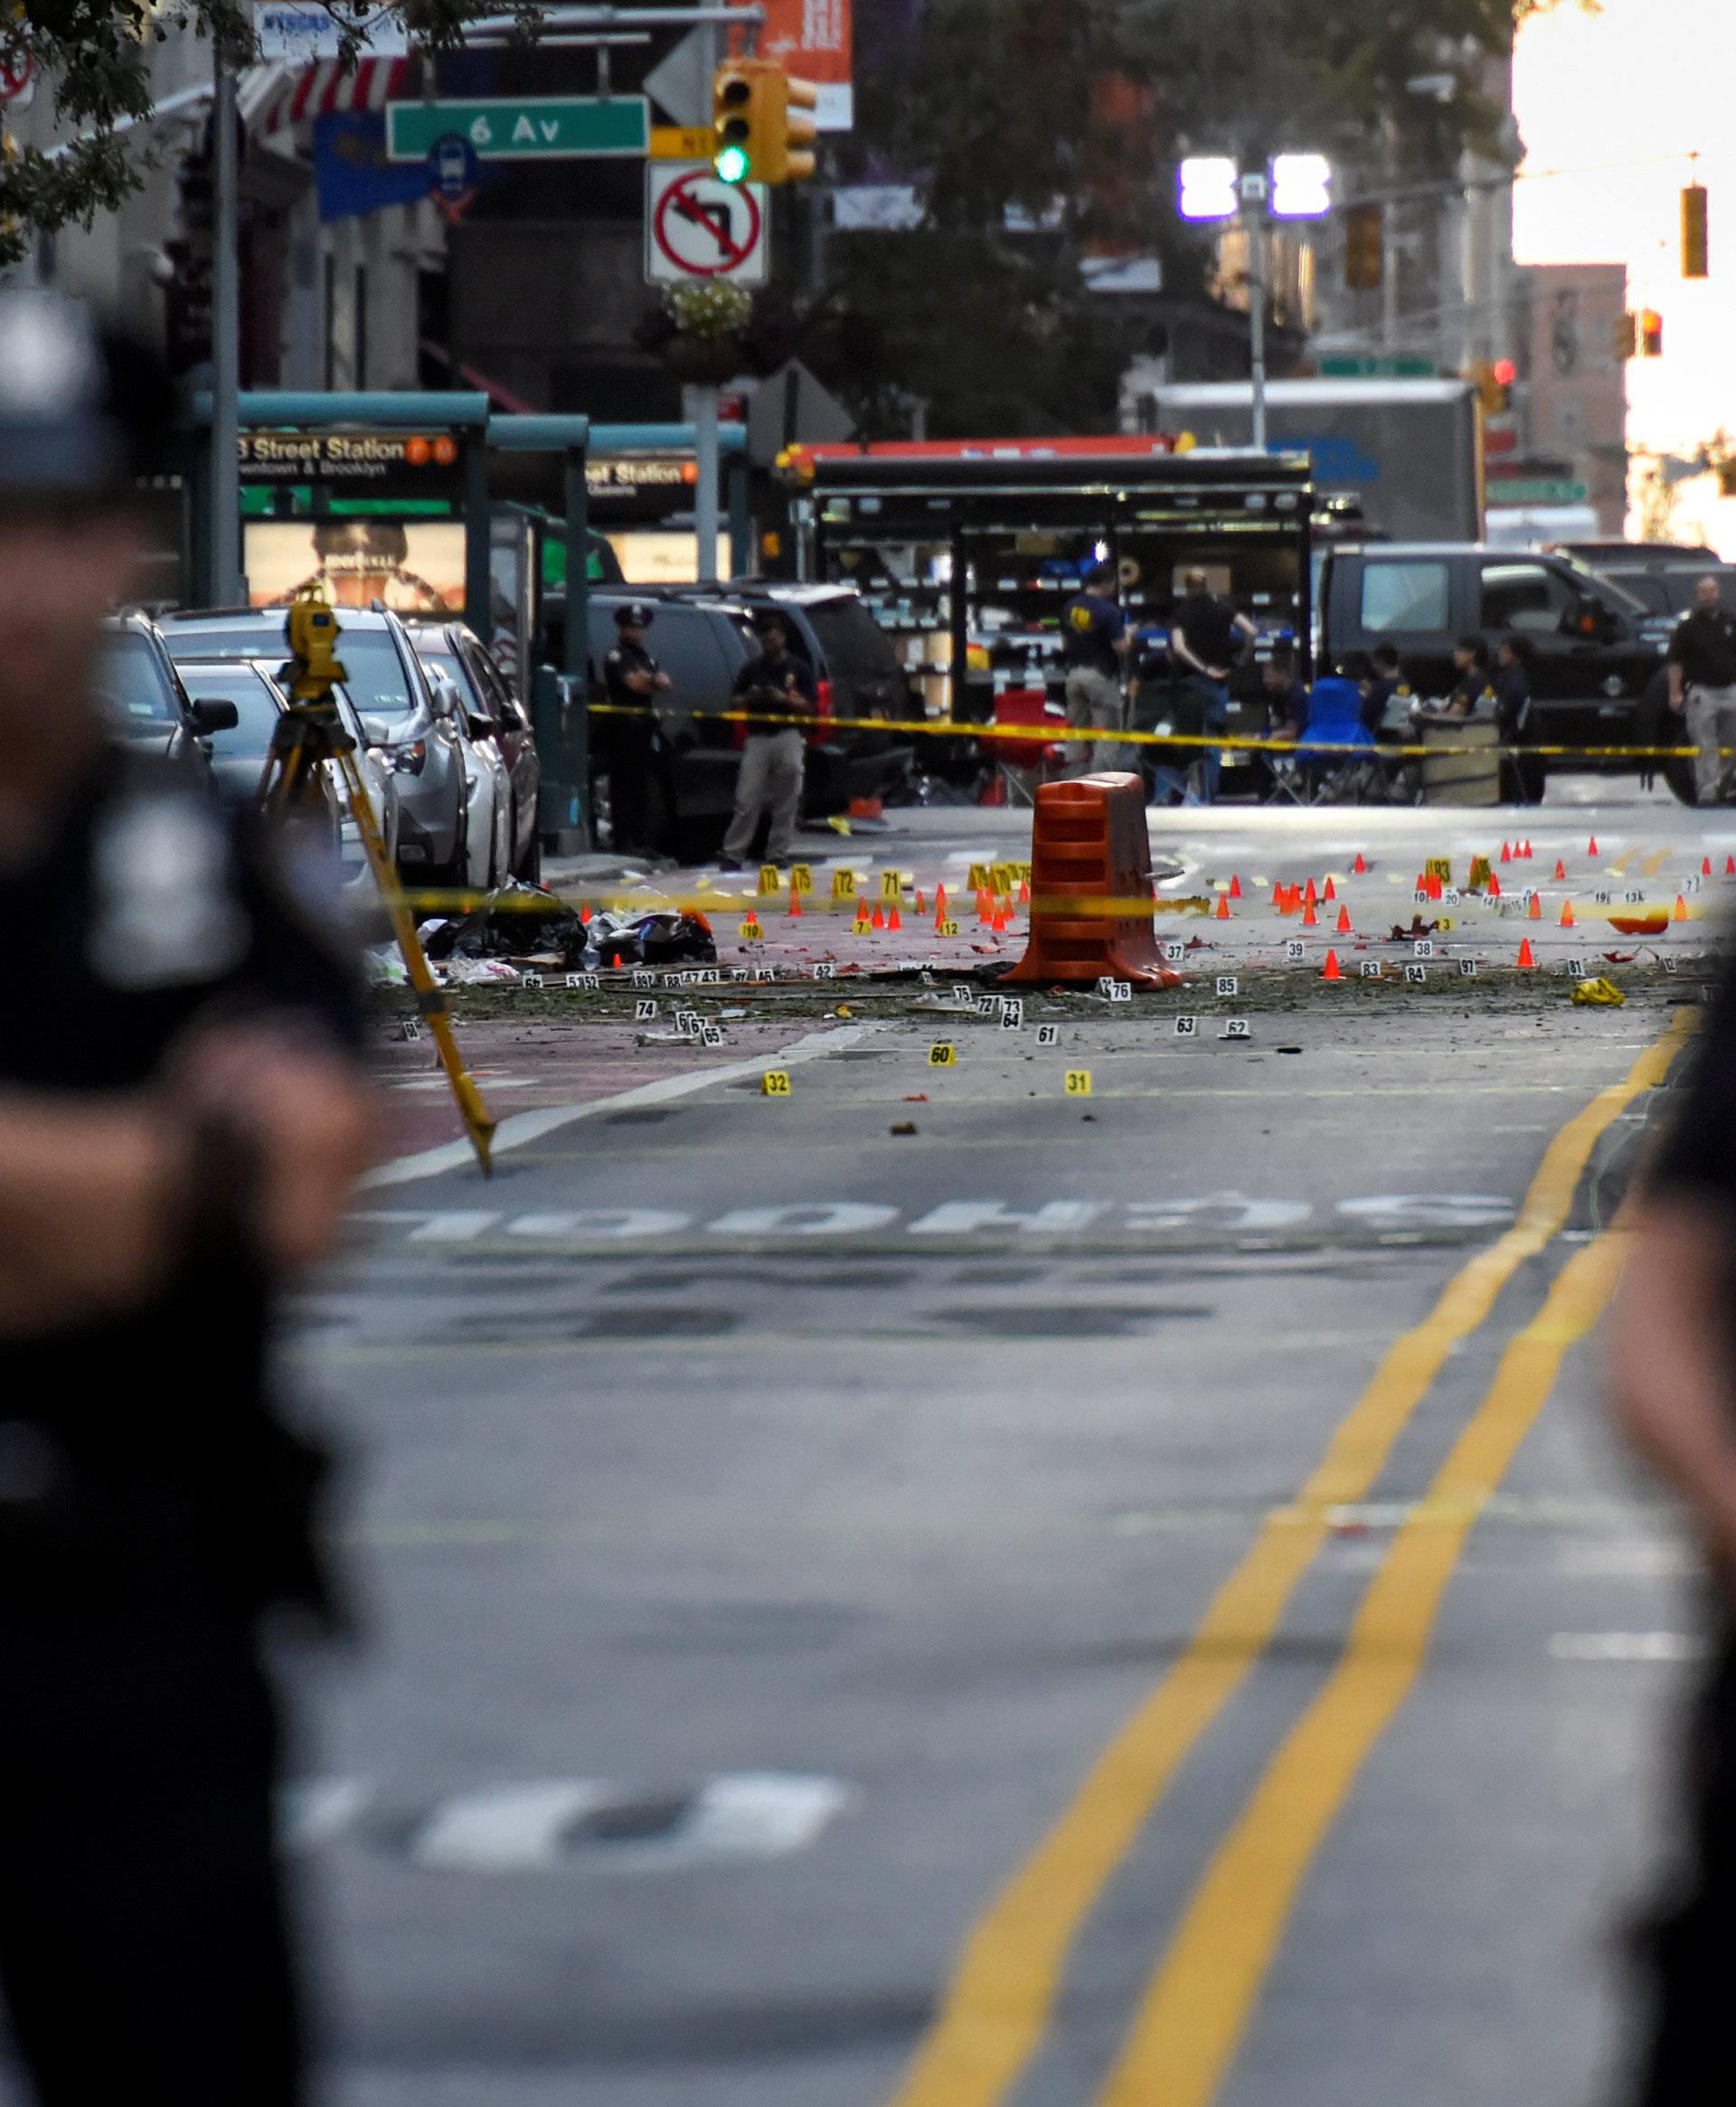 NYPD officers stand near the site of an explosion in New York